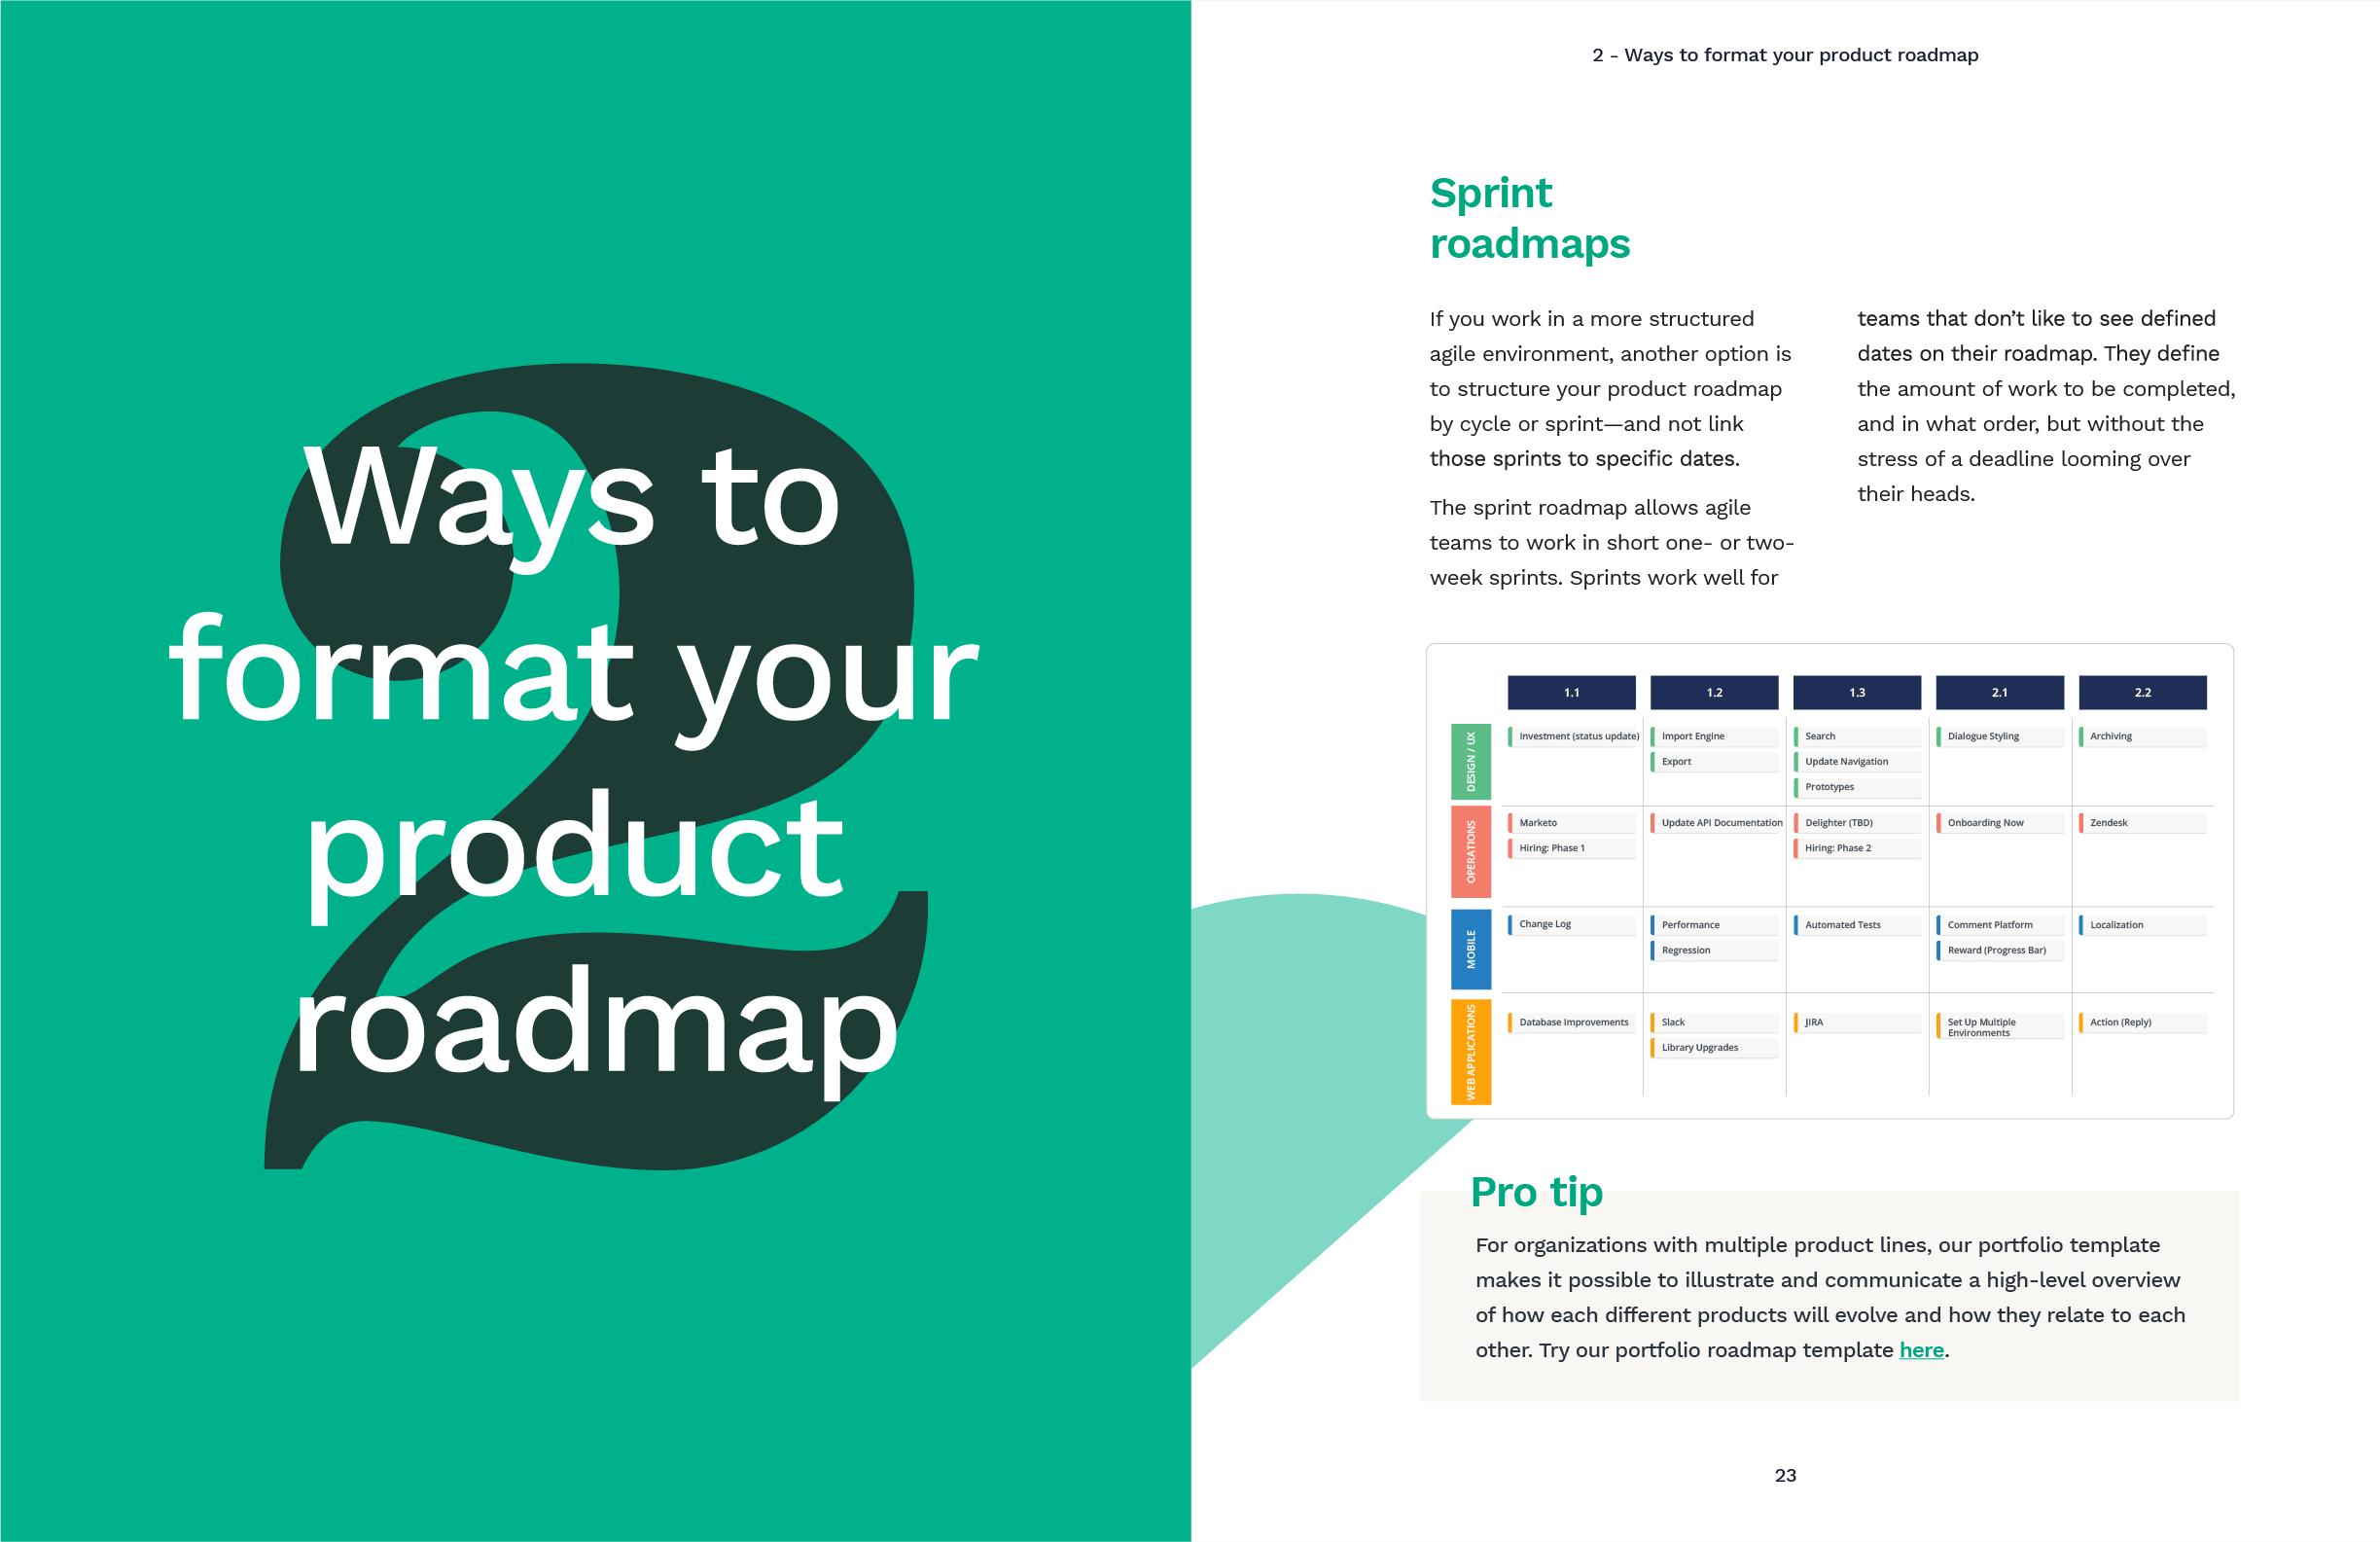 Chapter two: ways to format your product roadmap